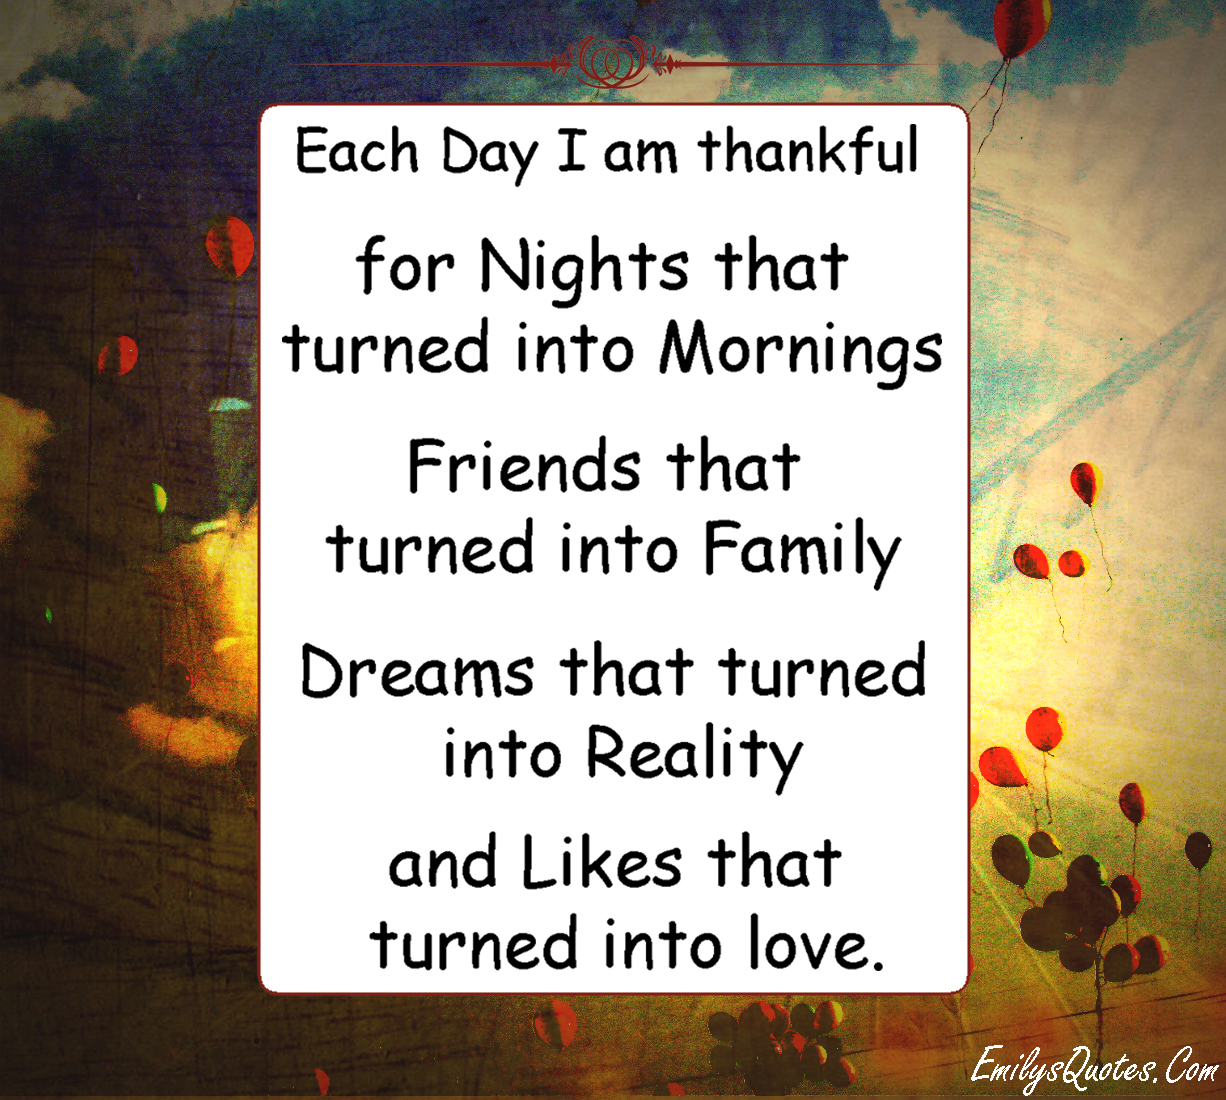 Each Day I am thankful  for Nights that turned into Mornings  Friends that turned into Family  Dreams that turned into Reality  and Likes that turned into love